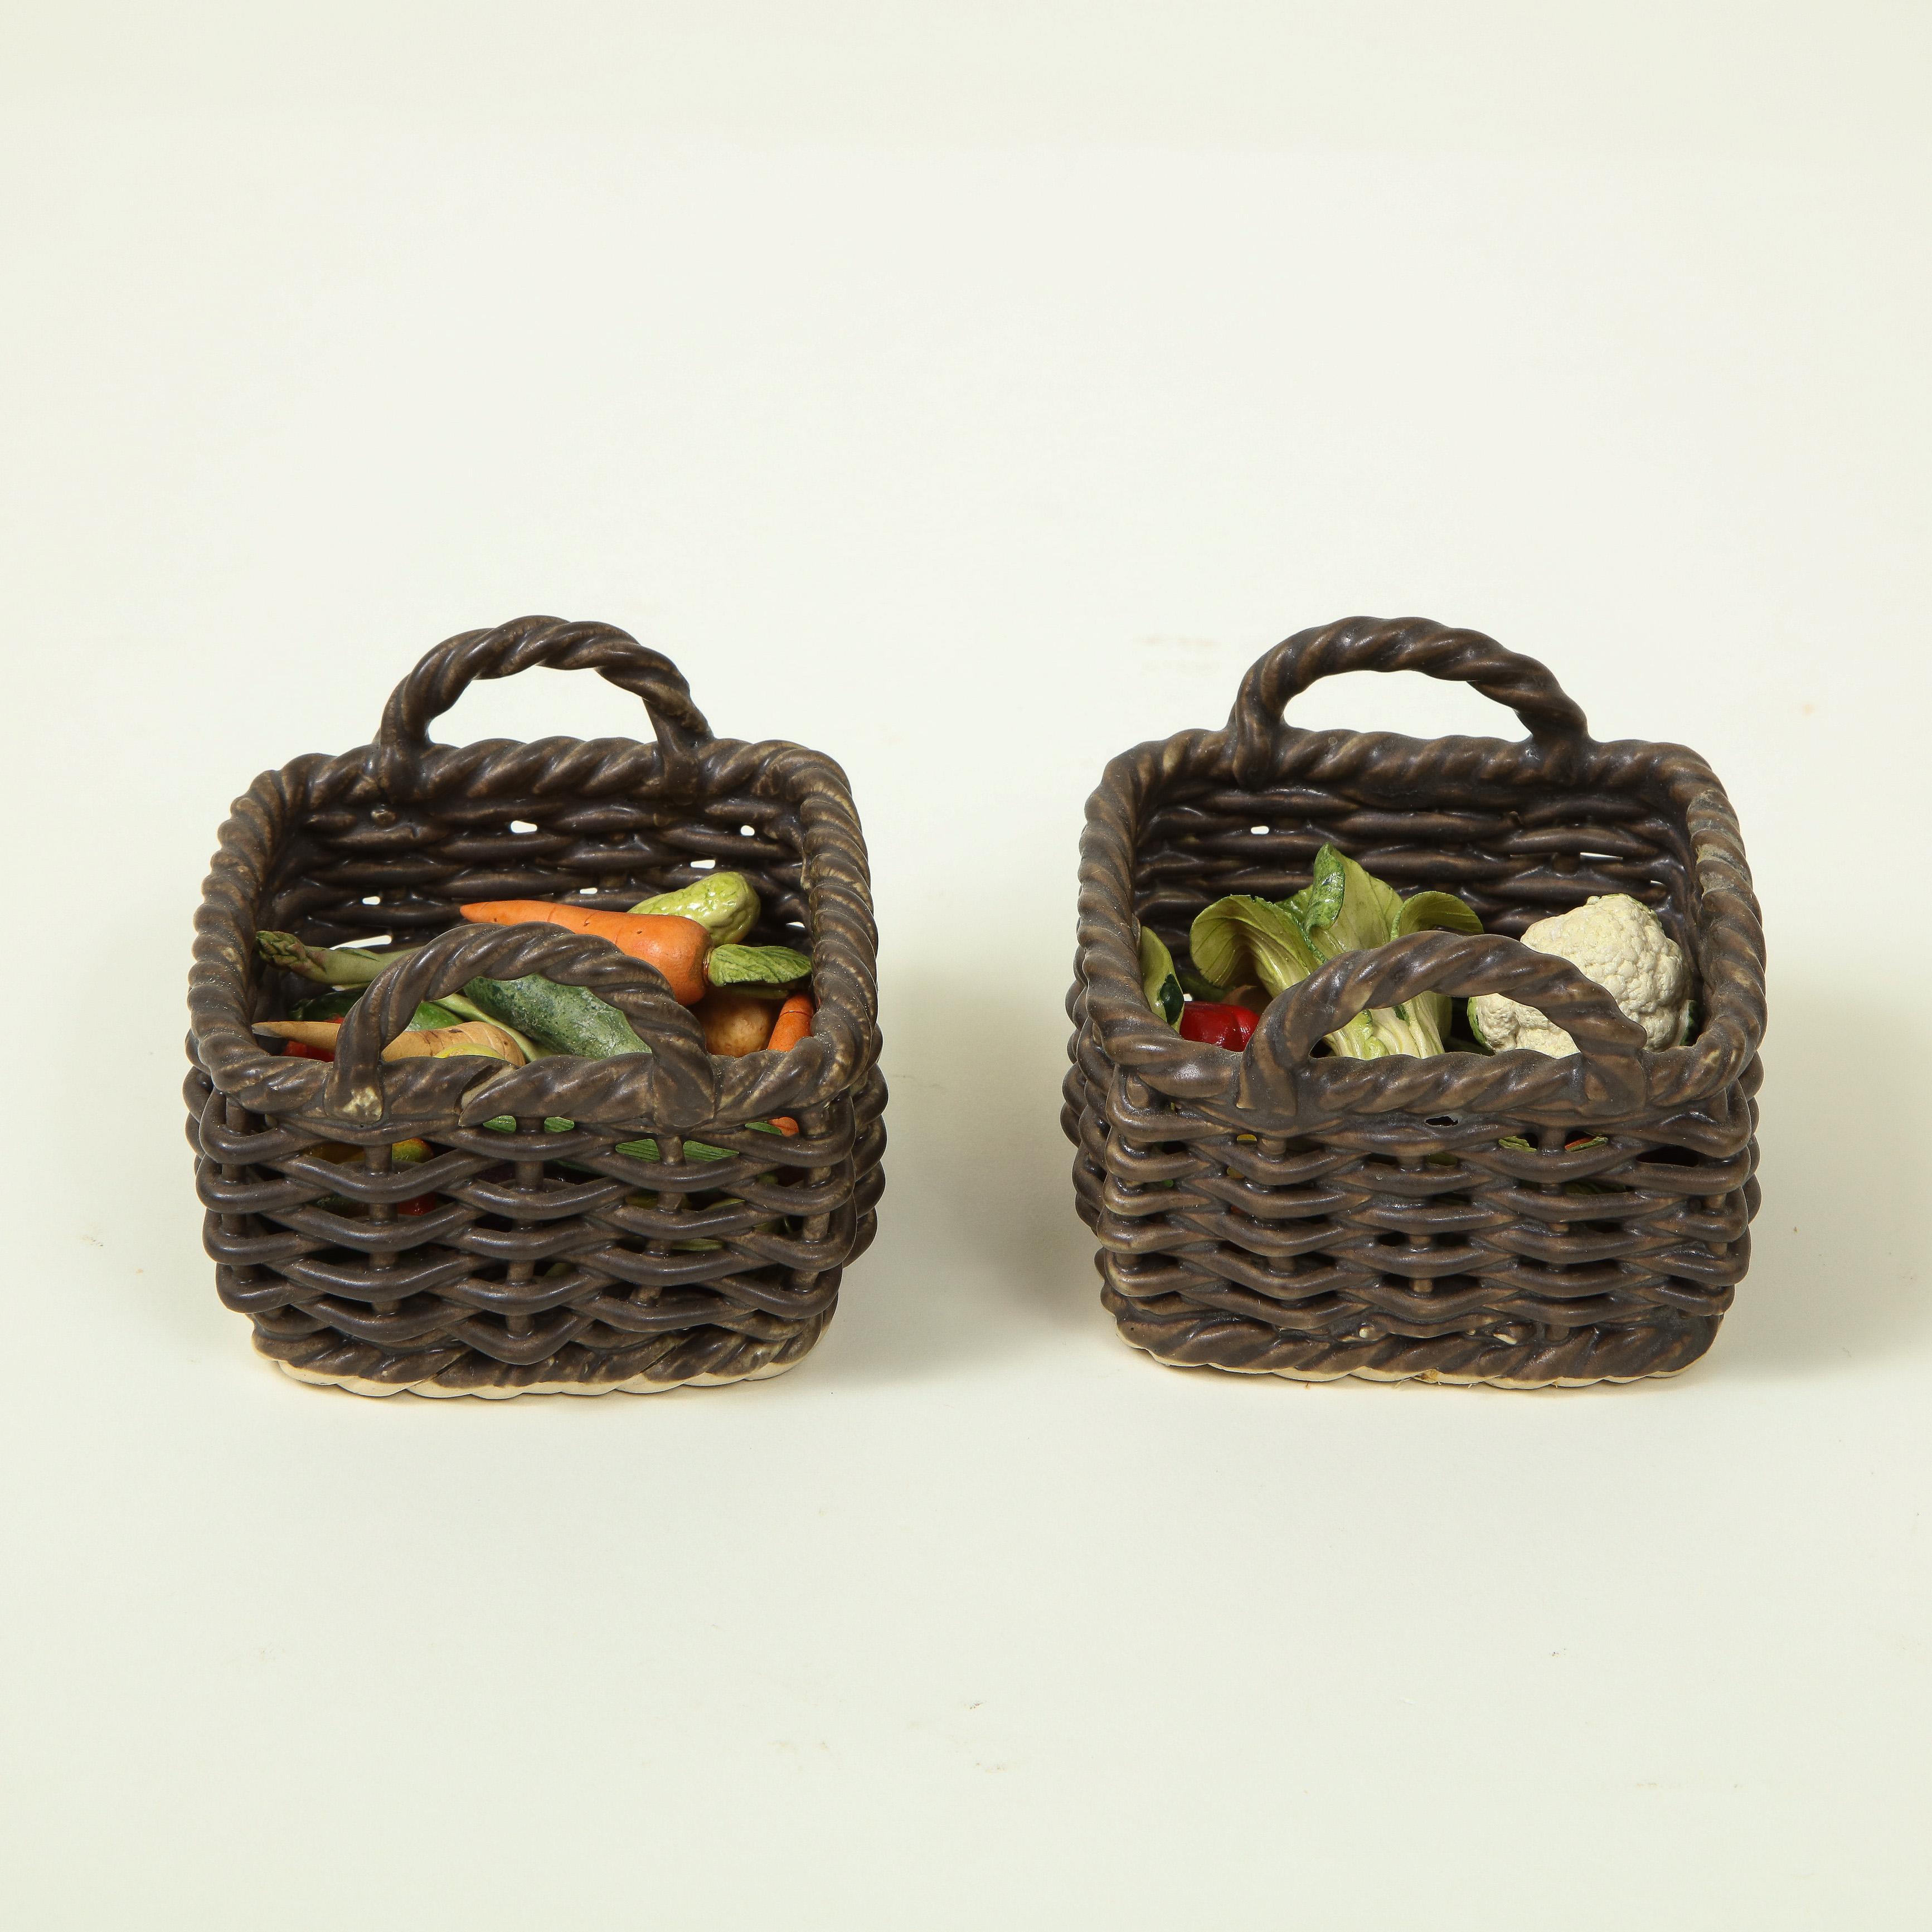 20th Century Miniature Pair of Ceramic Wicker Baskets with Vegetables